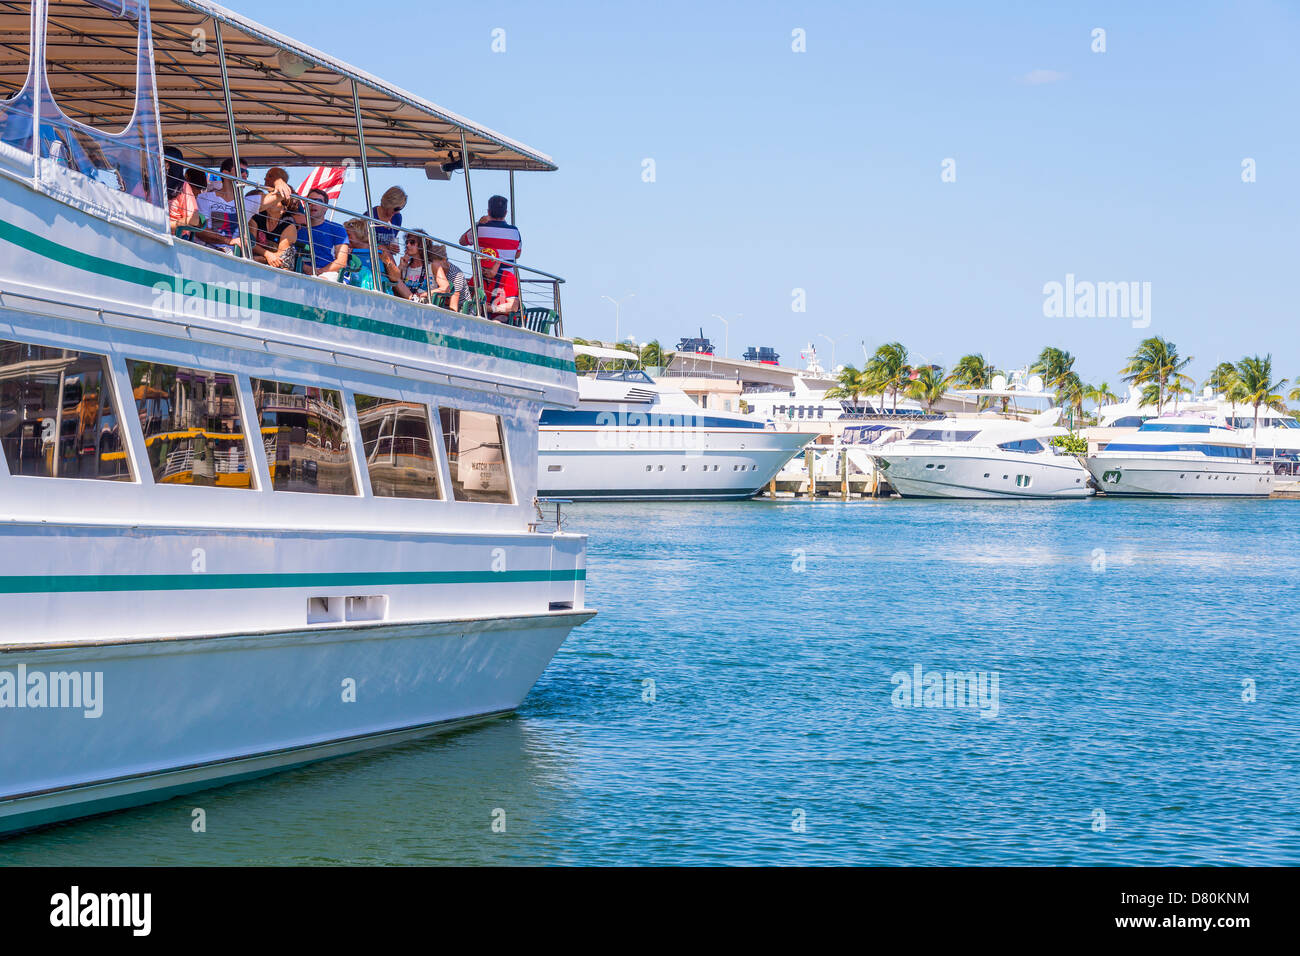 Tourists are about to leave on a coastal boat trip, Miami, Florida, USA Stock Photo